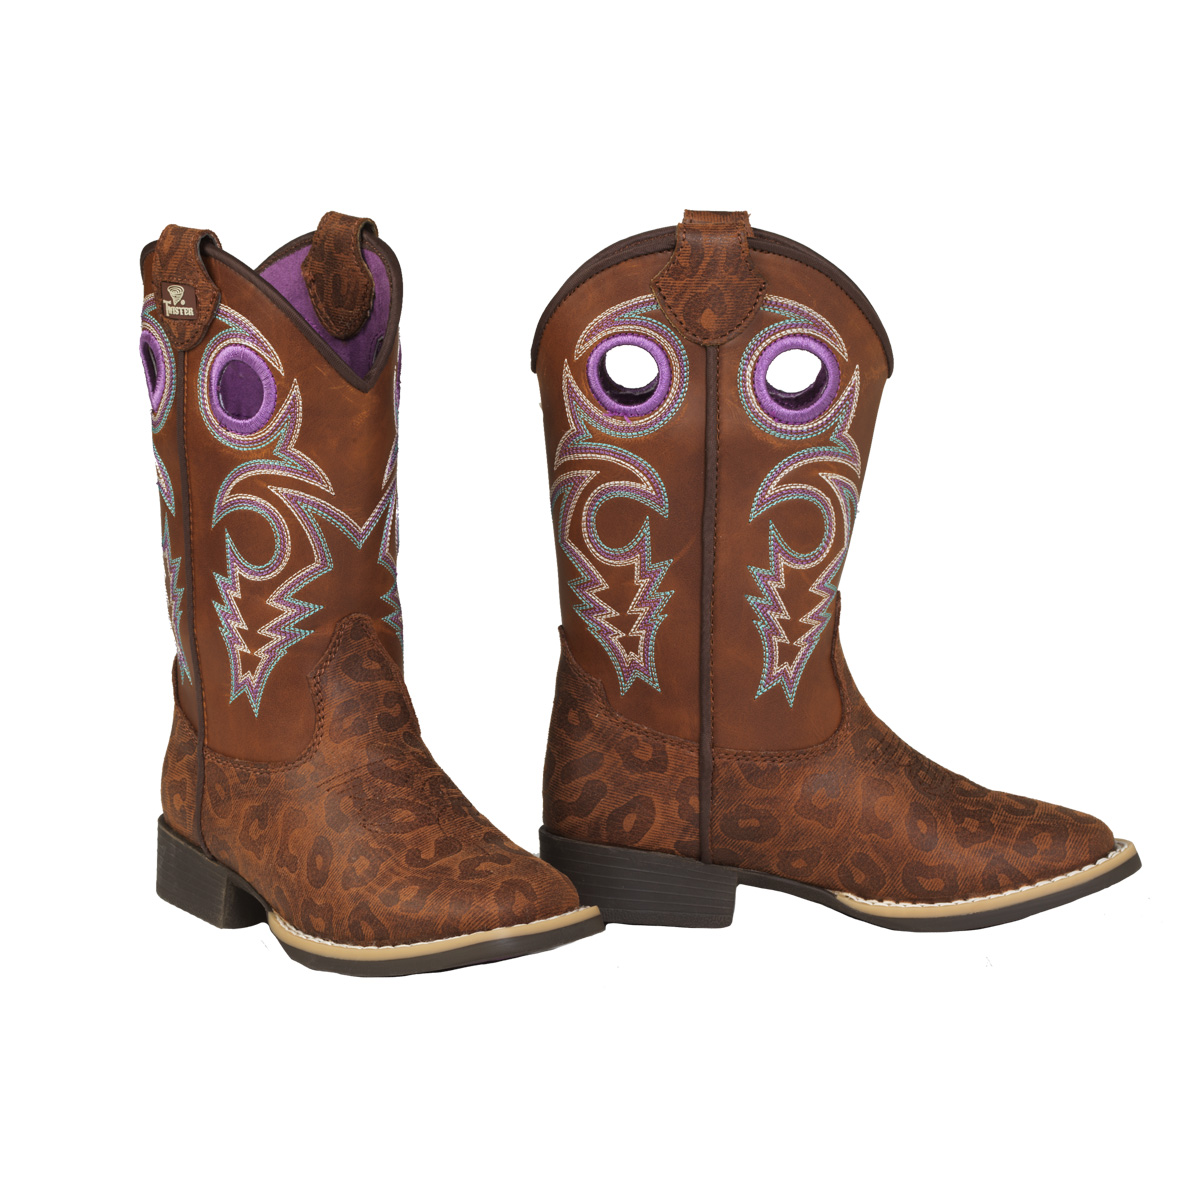 Twister Youth Girl's Dottie Western Boots - Brown